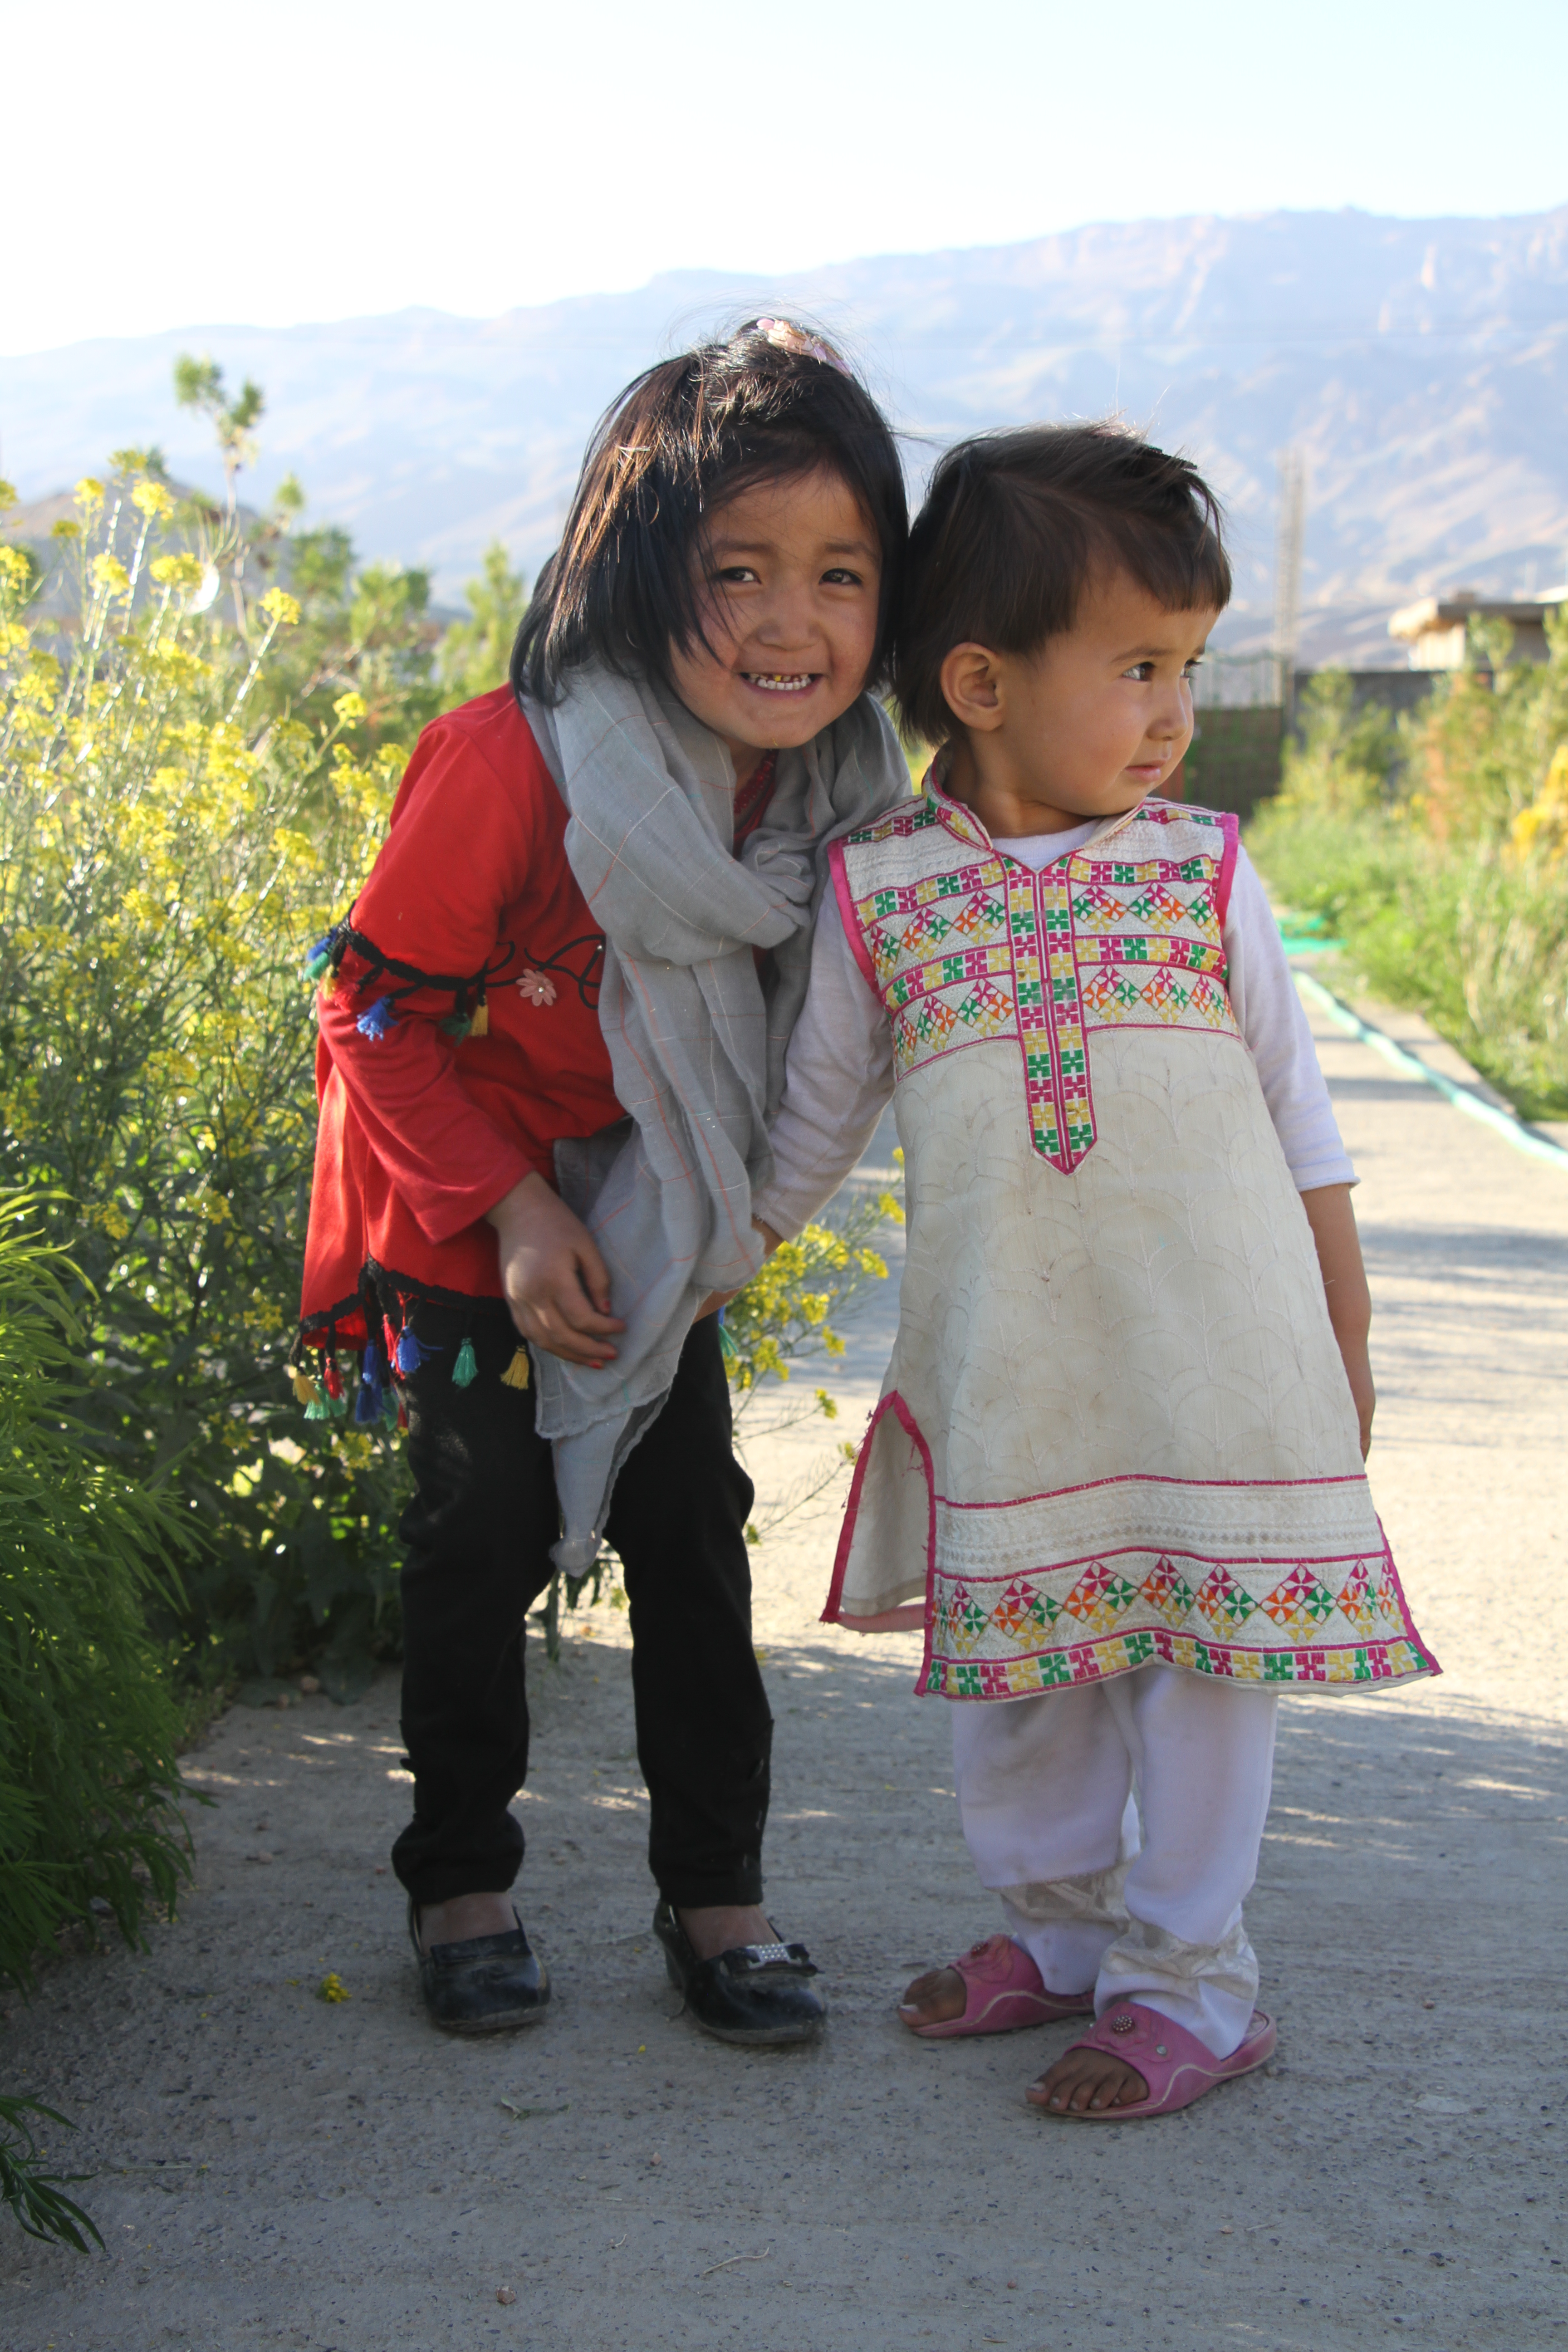 Kids enjoying the facilities of the Clean and Green Cities (CGC) park in Bamyan